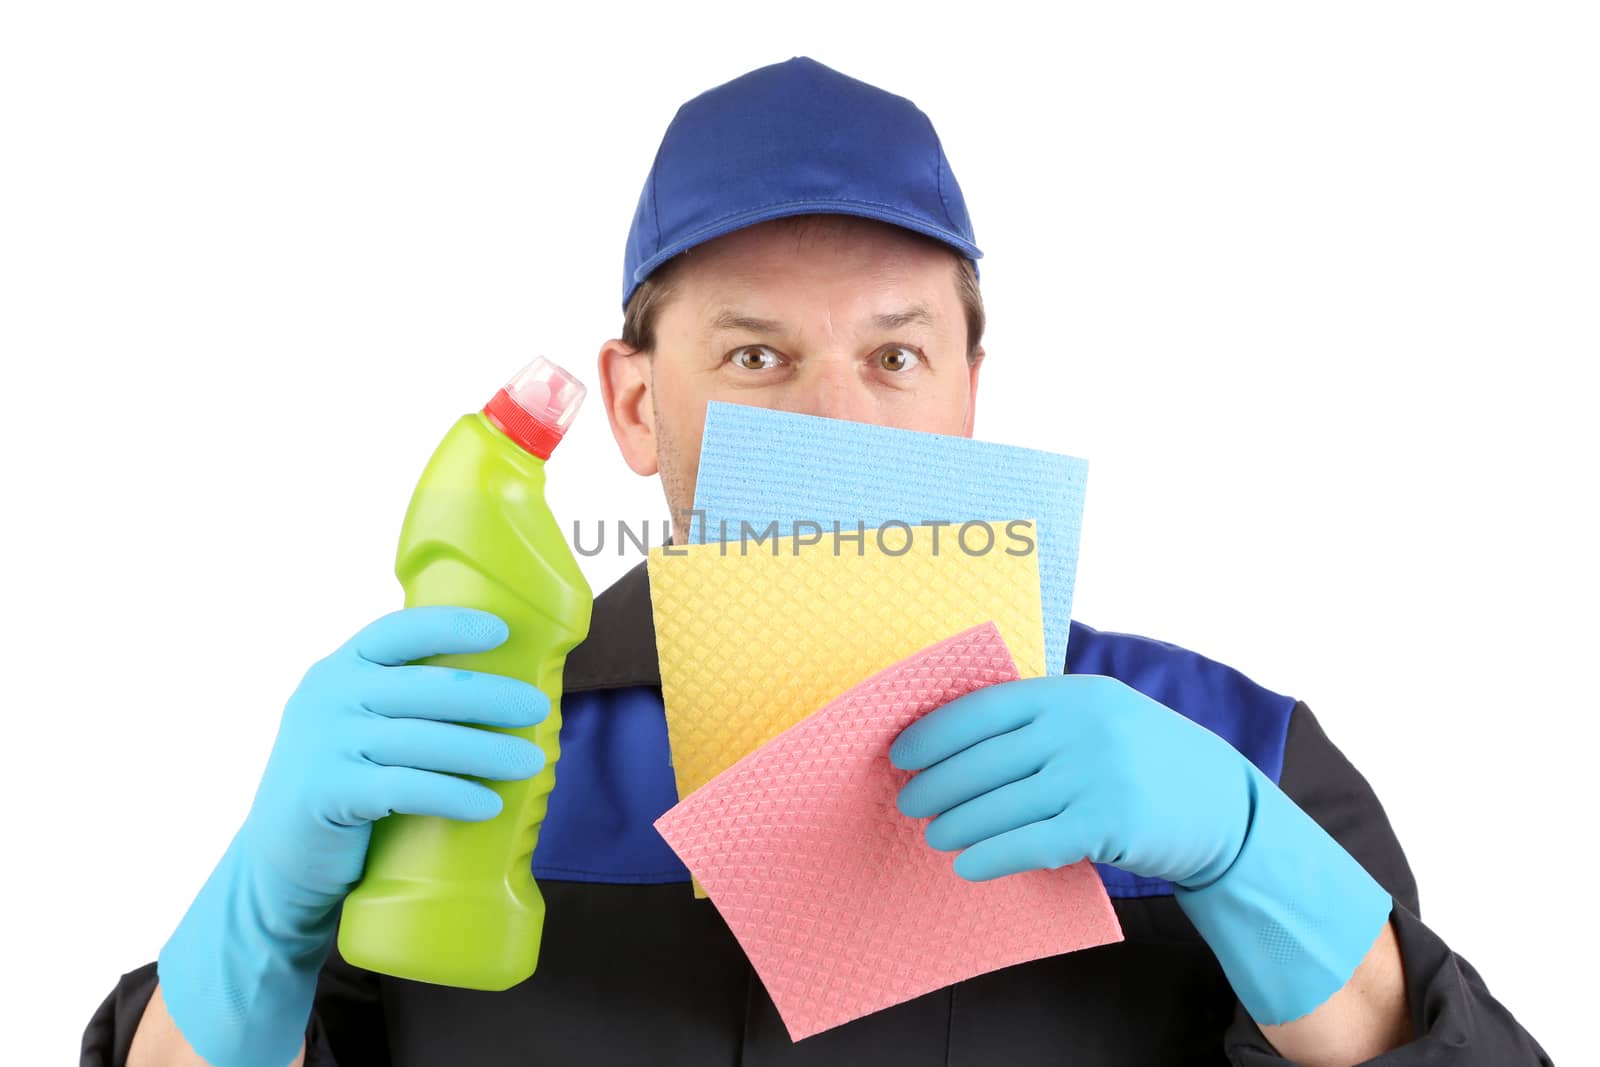 Man holds bottle and sponge. Isolated on a white background.